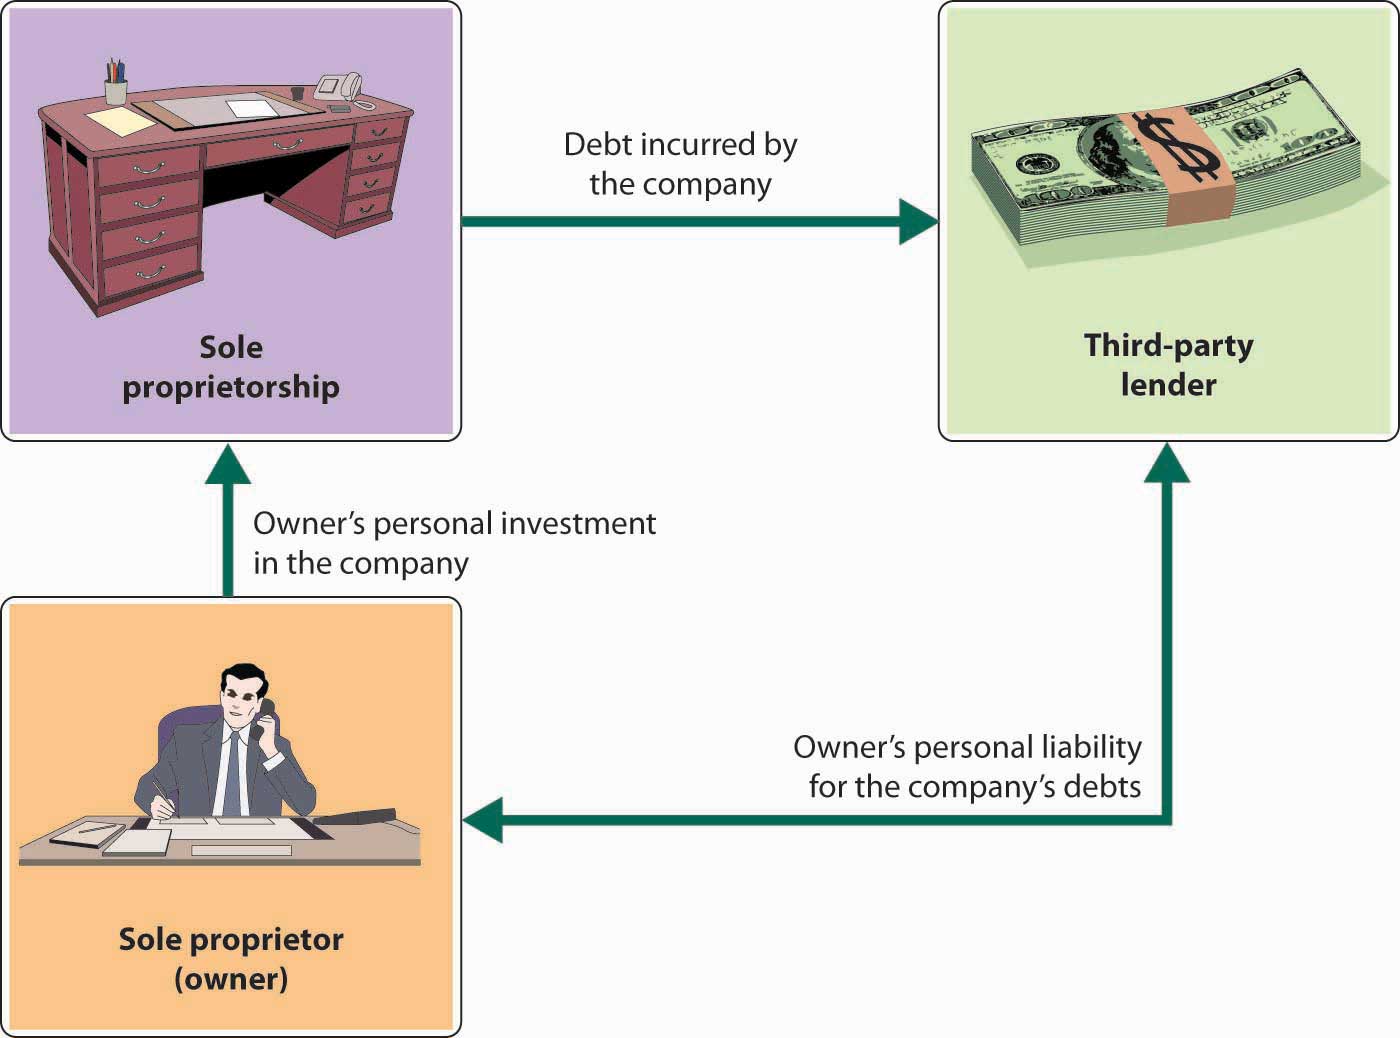 Connections between sole proprietor (owner), sole proprietorship, and third-party lender. The owner has sole proprietorship due to the owner’s personal investment in the company. Because of debt incurred by the company, a third-party lender is involved. The owner has personal liability for the company’s debts.